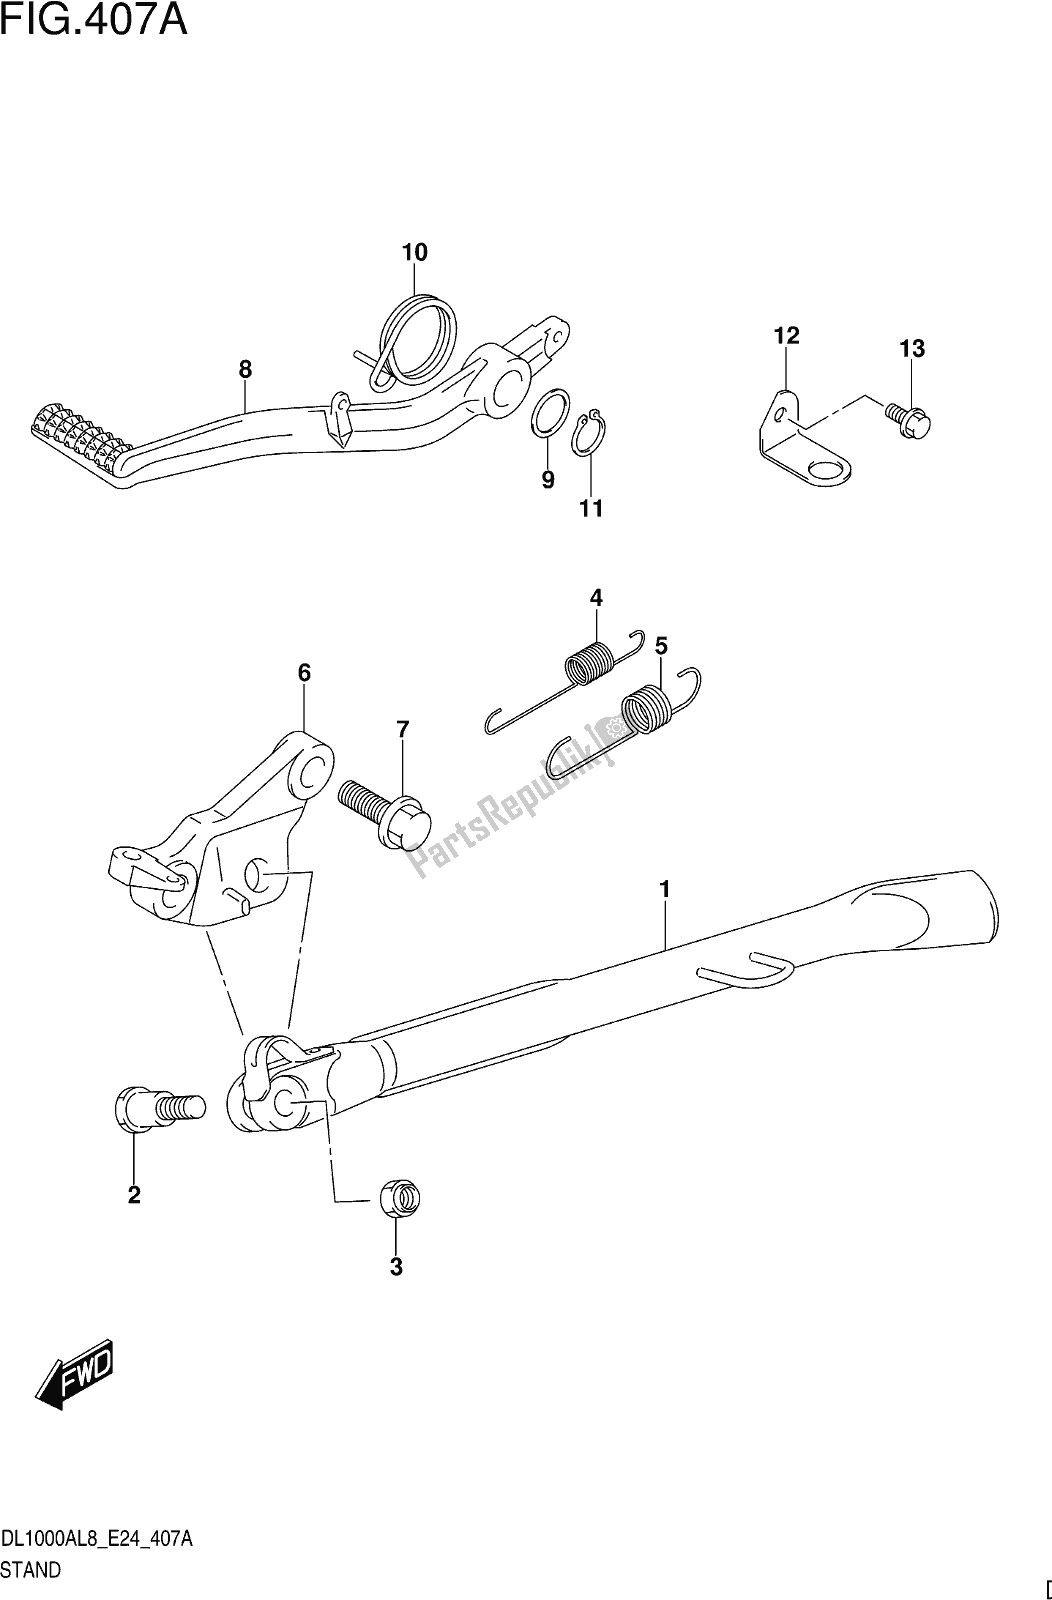 All parts for the Fig. 407a Stand of the Suzuki DL 1000 XA 2018